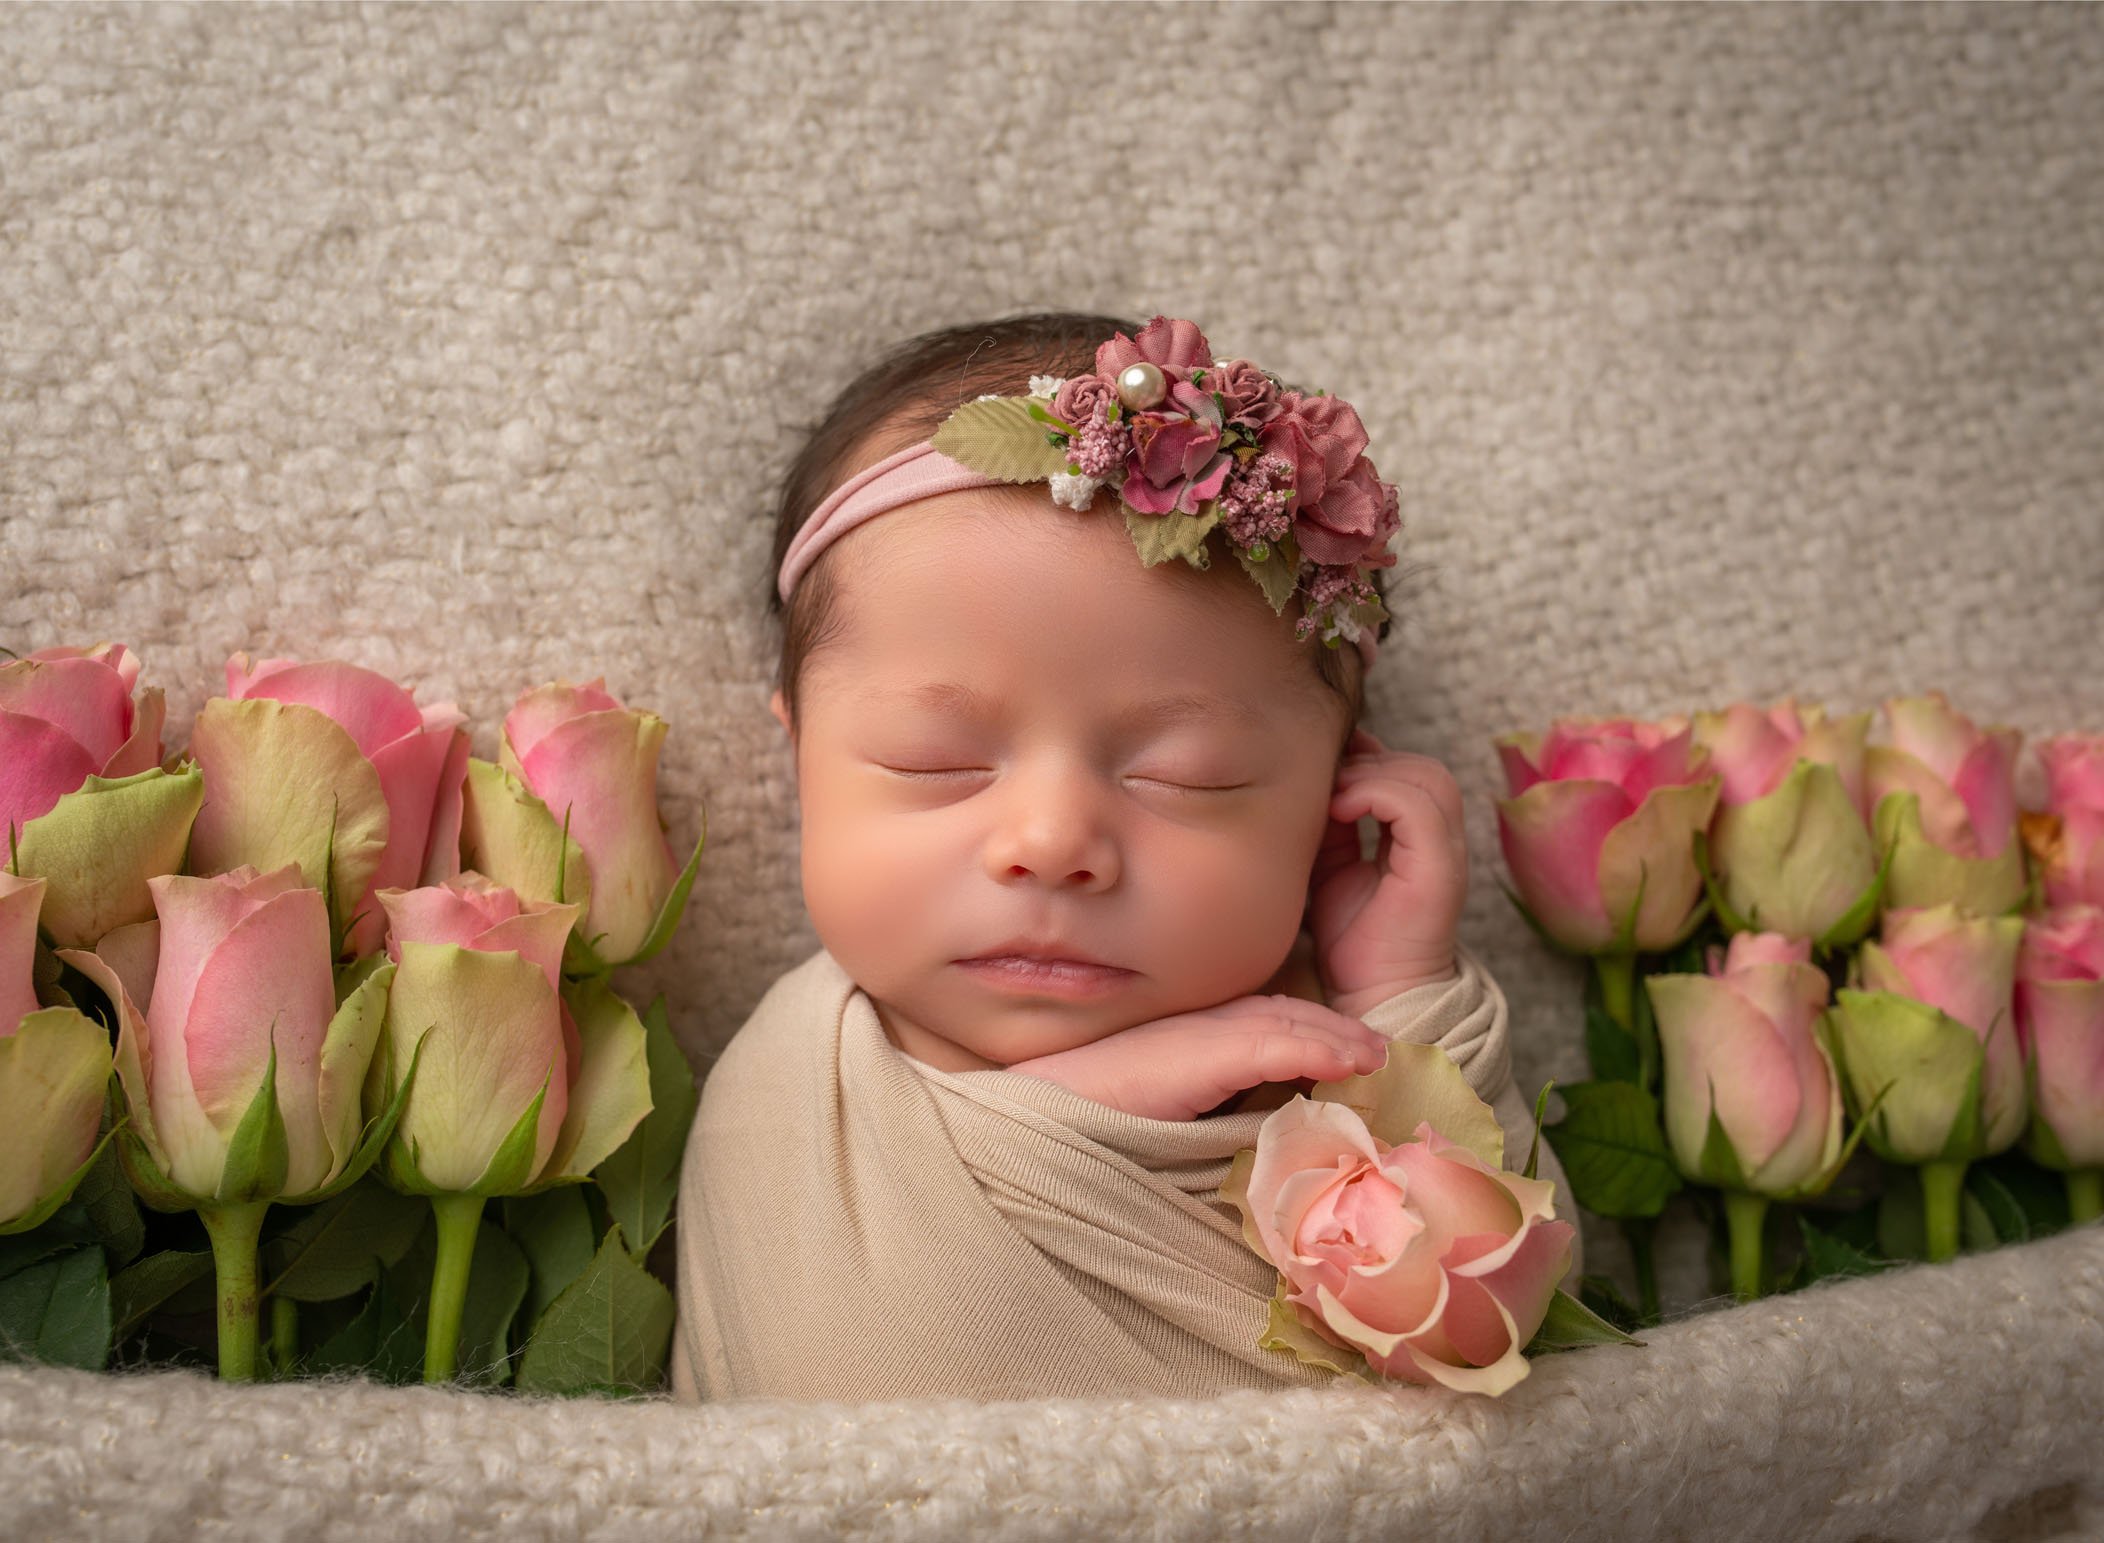 newborn baby girl sleeping surrounded by pink variegated roses